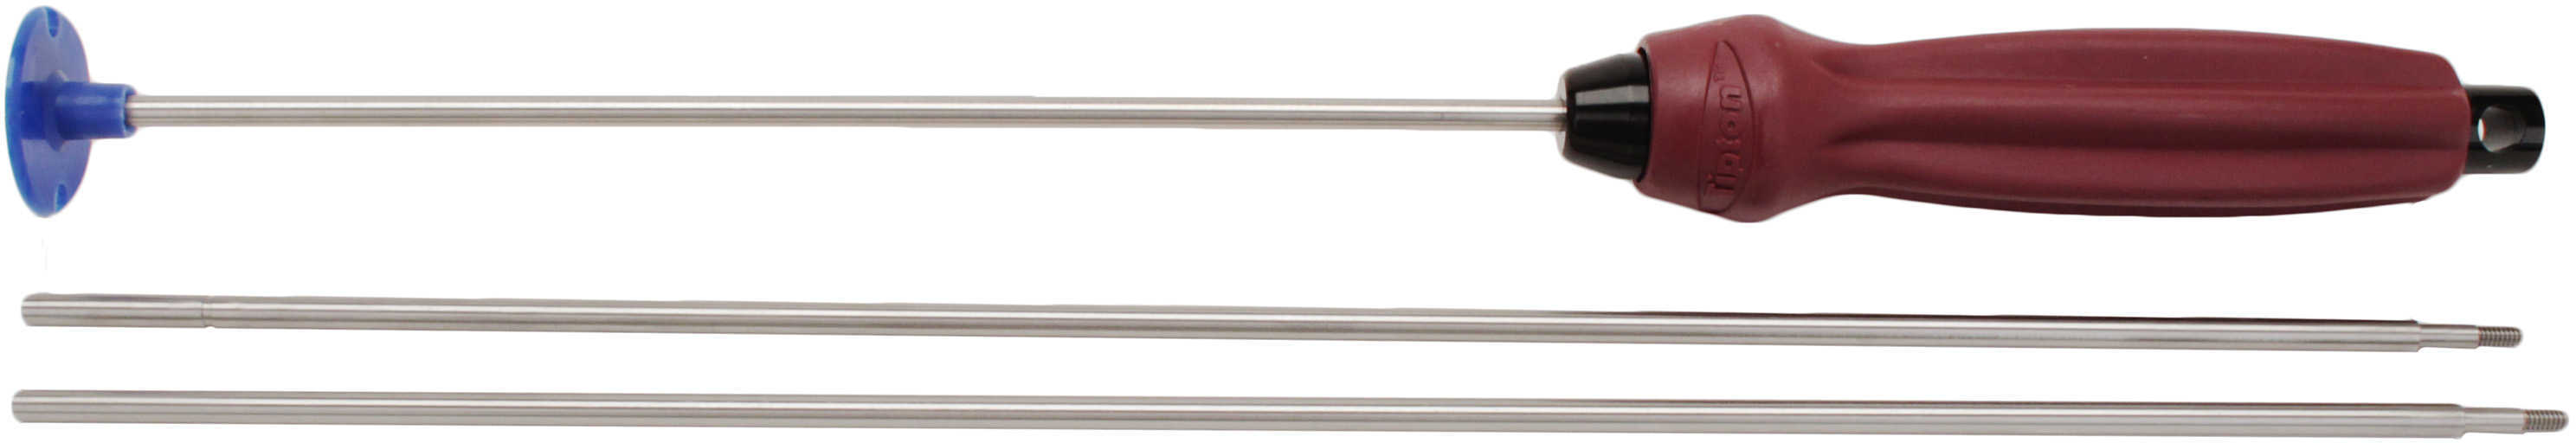 Tipton Deluxe 3-Piece Stainless Steel Cleaning Rod, 22 Caliber Md: 429954